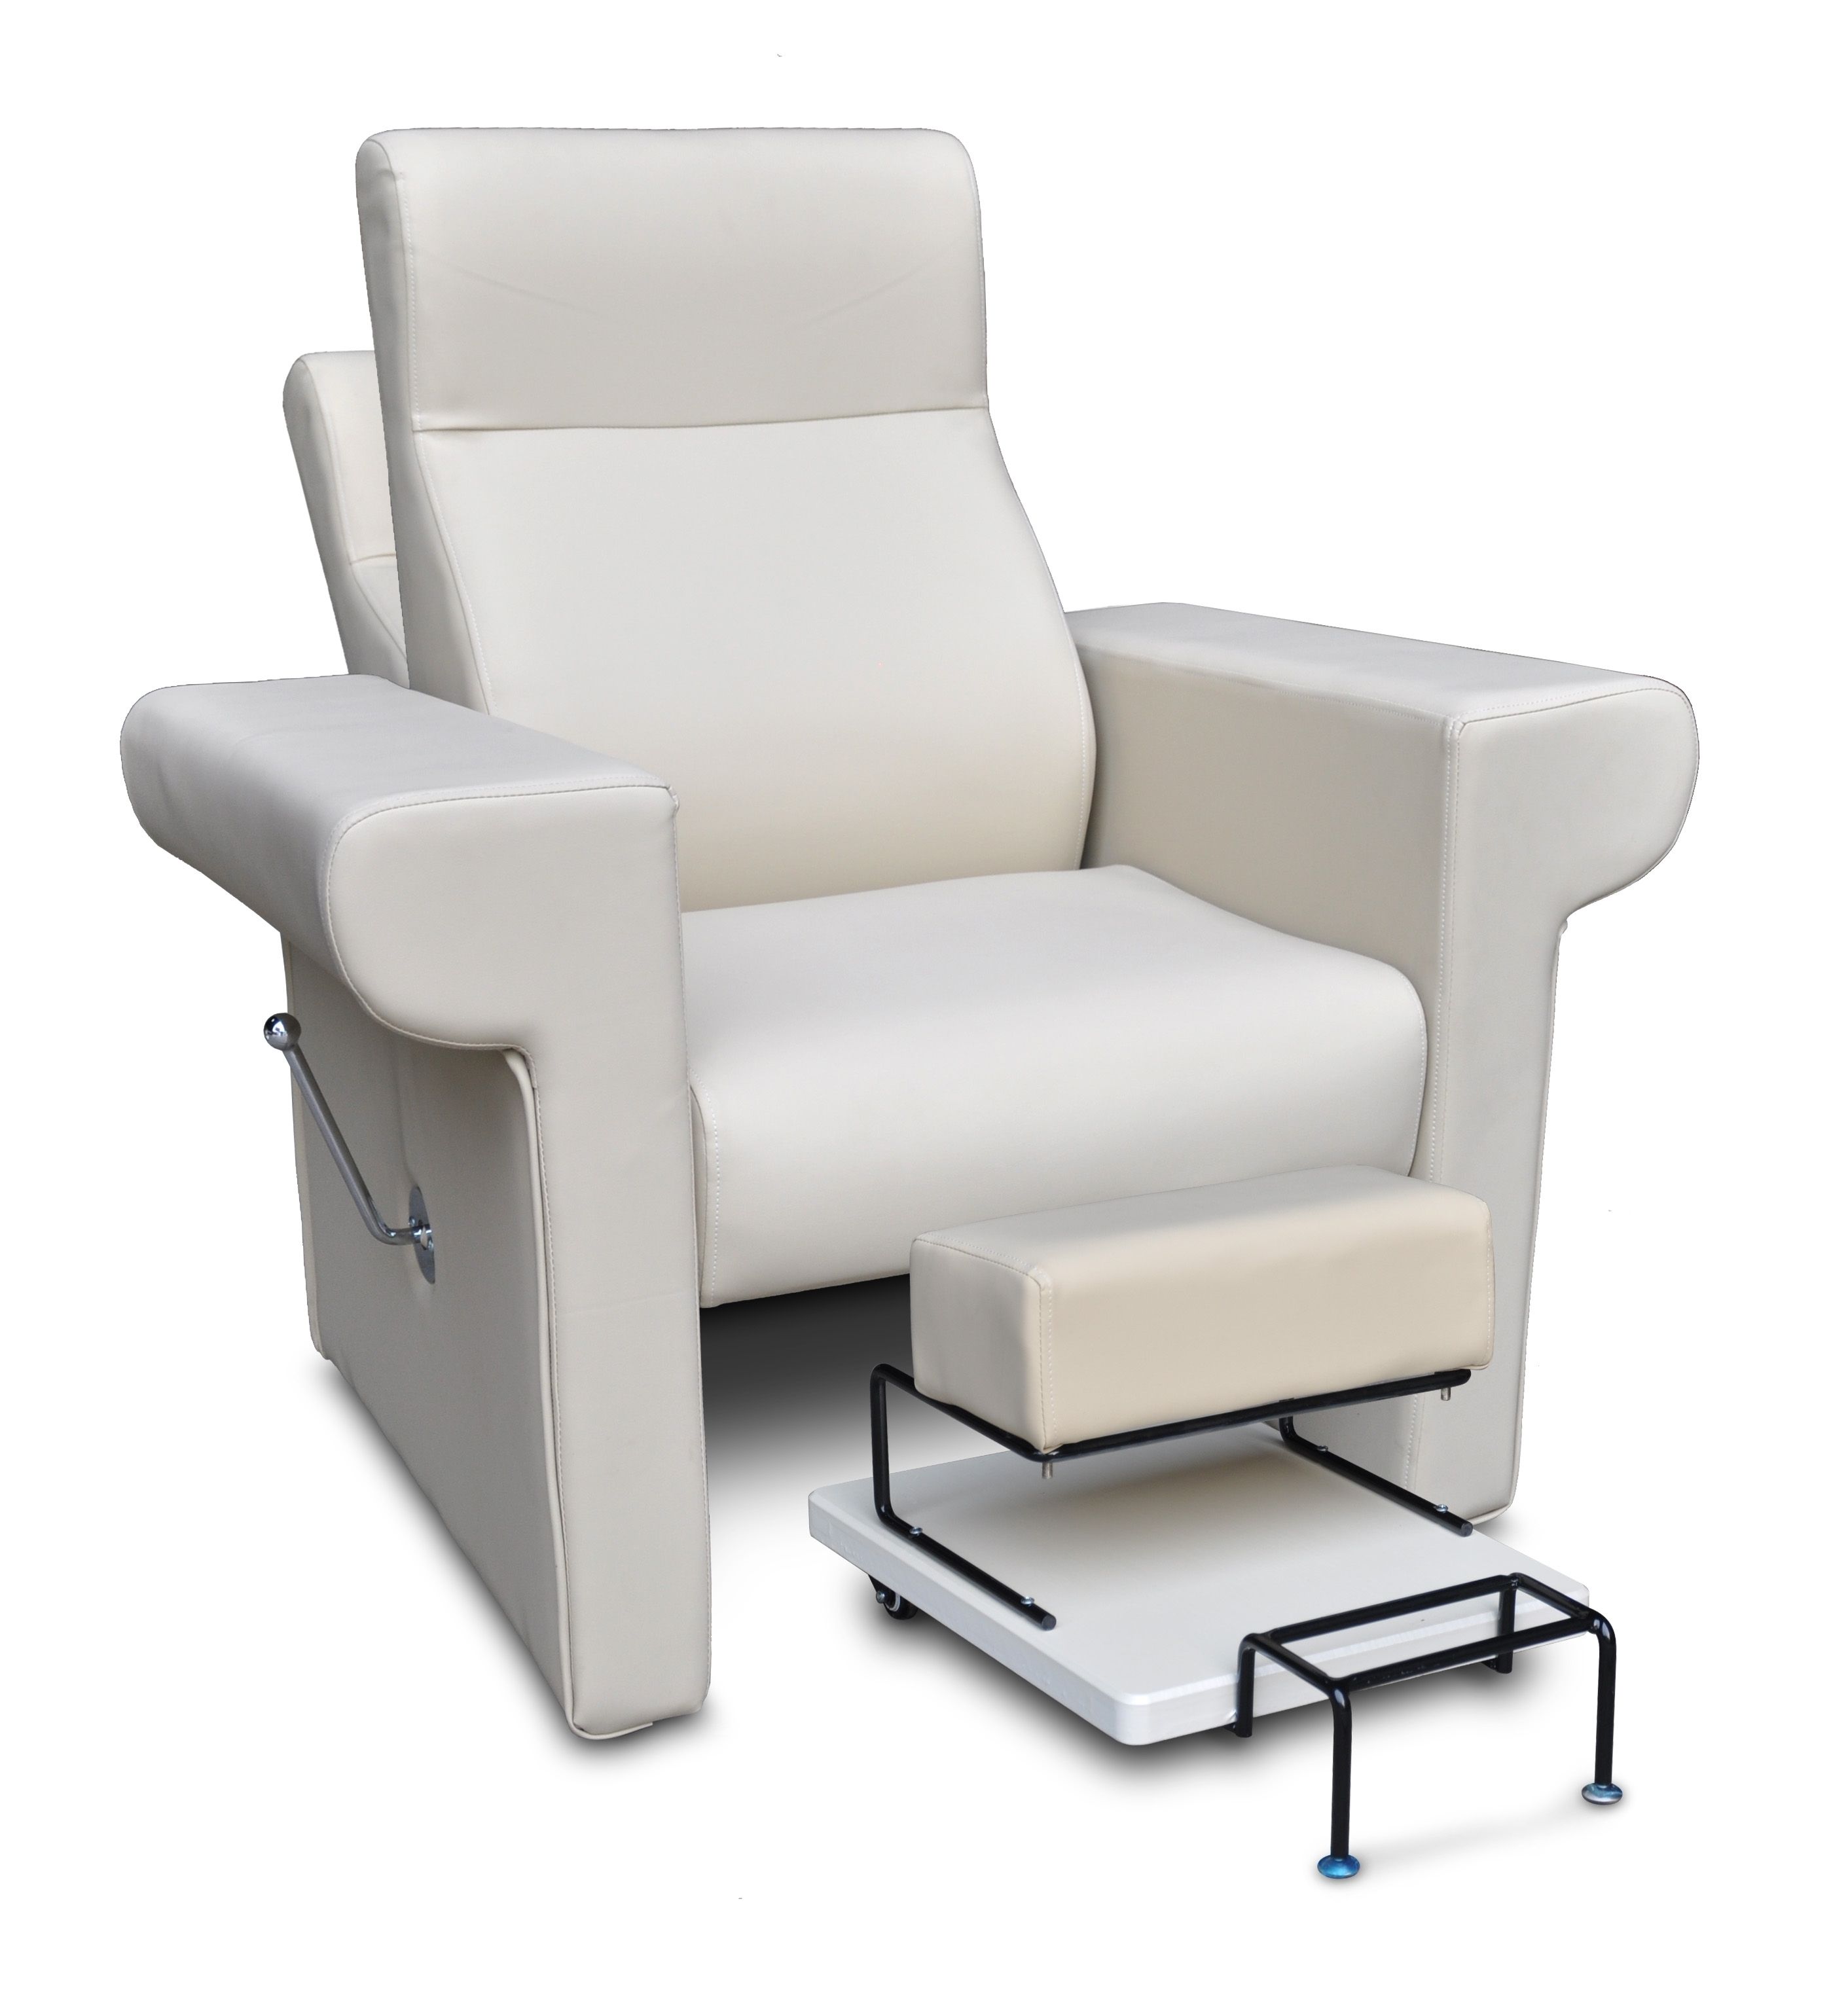 Al Basel Cosmetics Trading Within Foot Massage Sofa Chairs (View 11 of 15)